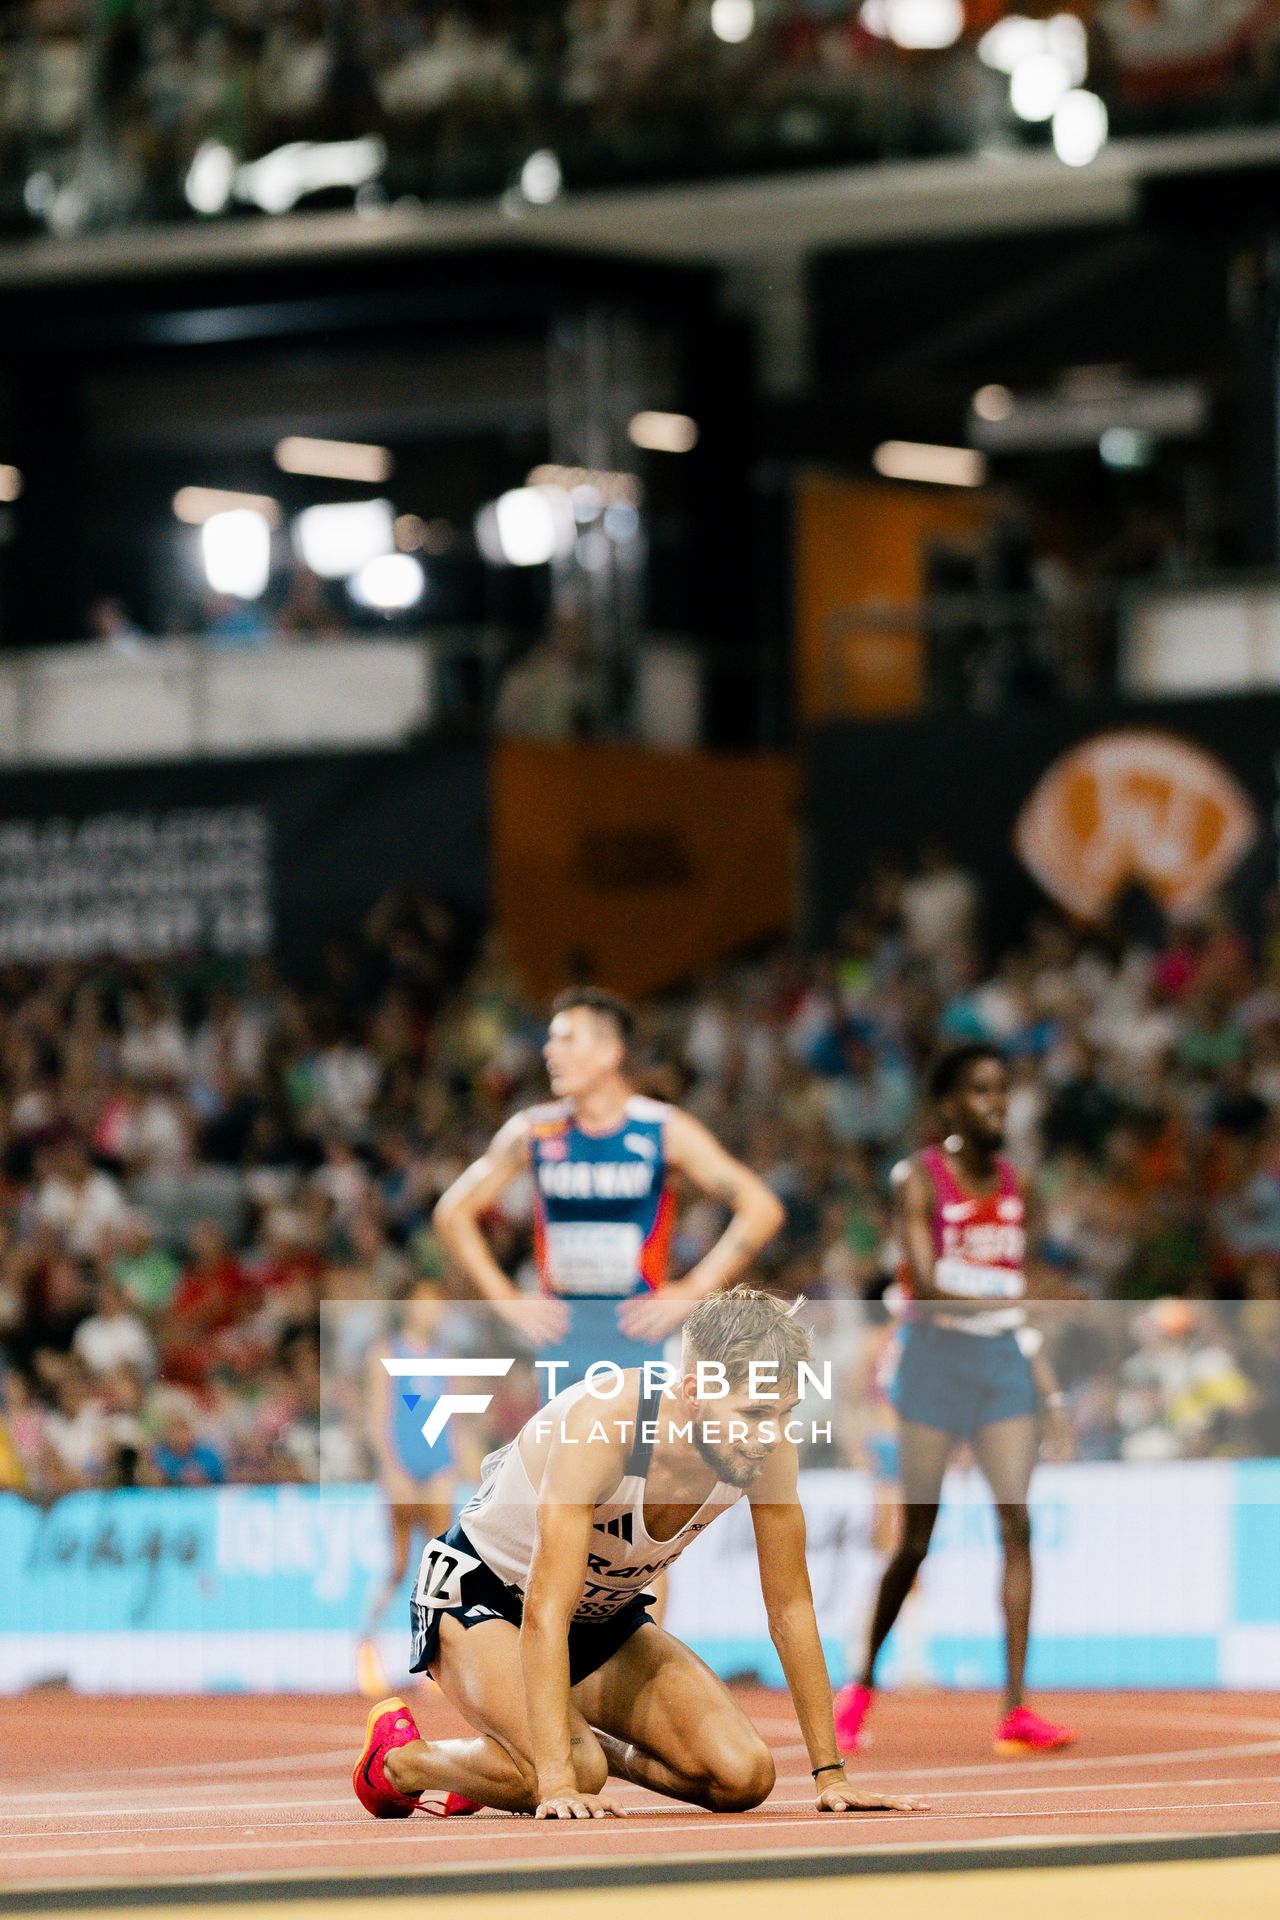 Jimmy Gressier (FRA/France) during the 5000 Metres on Day 9 of the World Athletics Championships Budapest 23 at the National Athletics Centre in Budapest, Hungary on August 27, 2023.